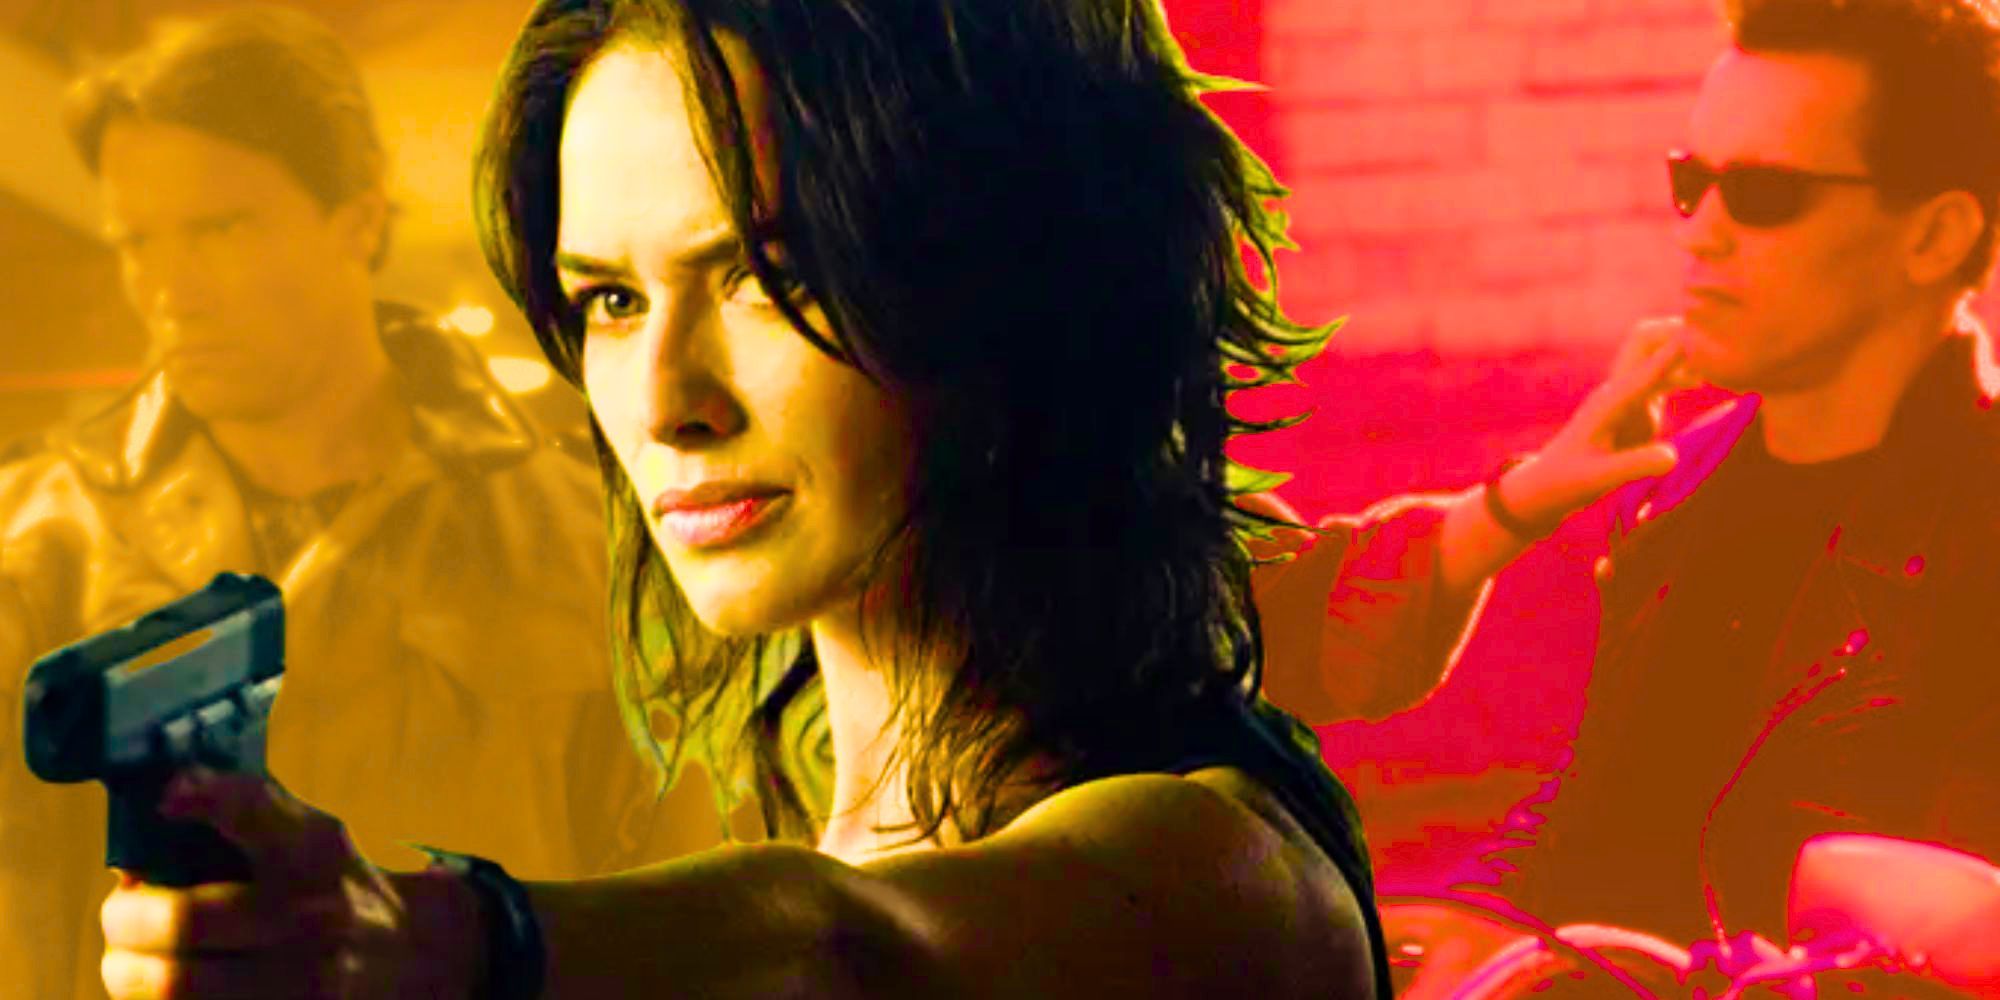 Lena Headey as Sarah Connor from the Sarah Connor Chronicles against a blending backdrop from Terminator movies